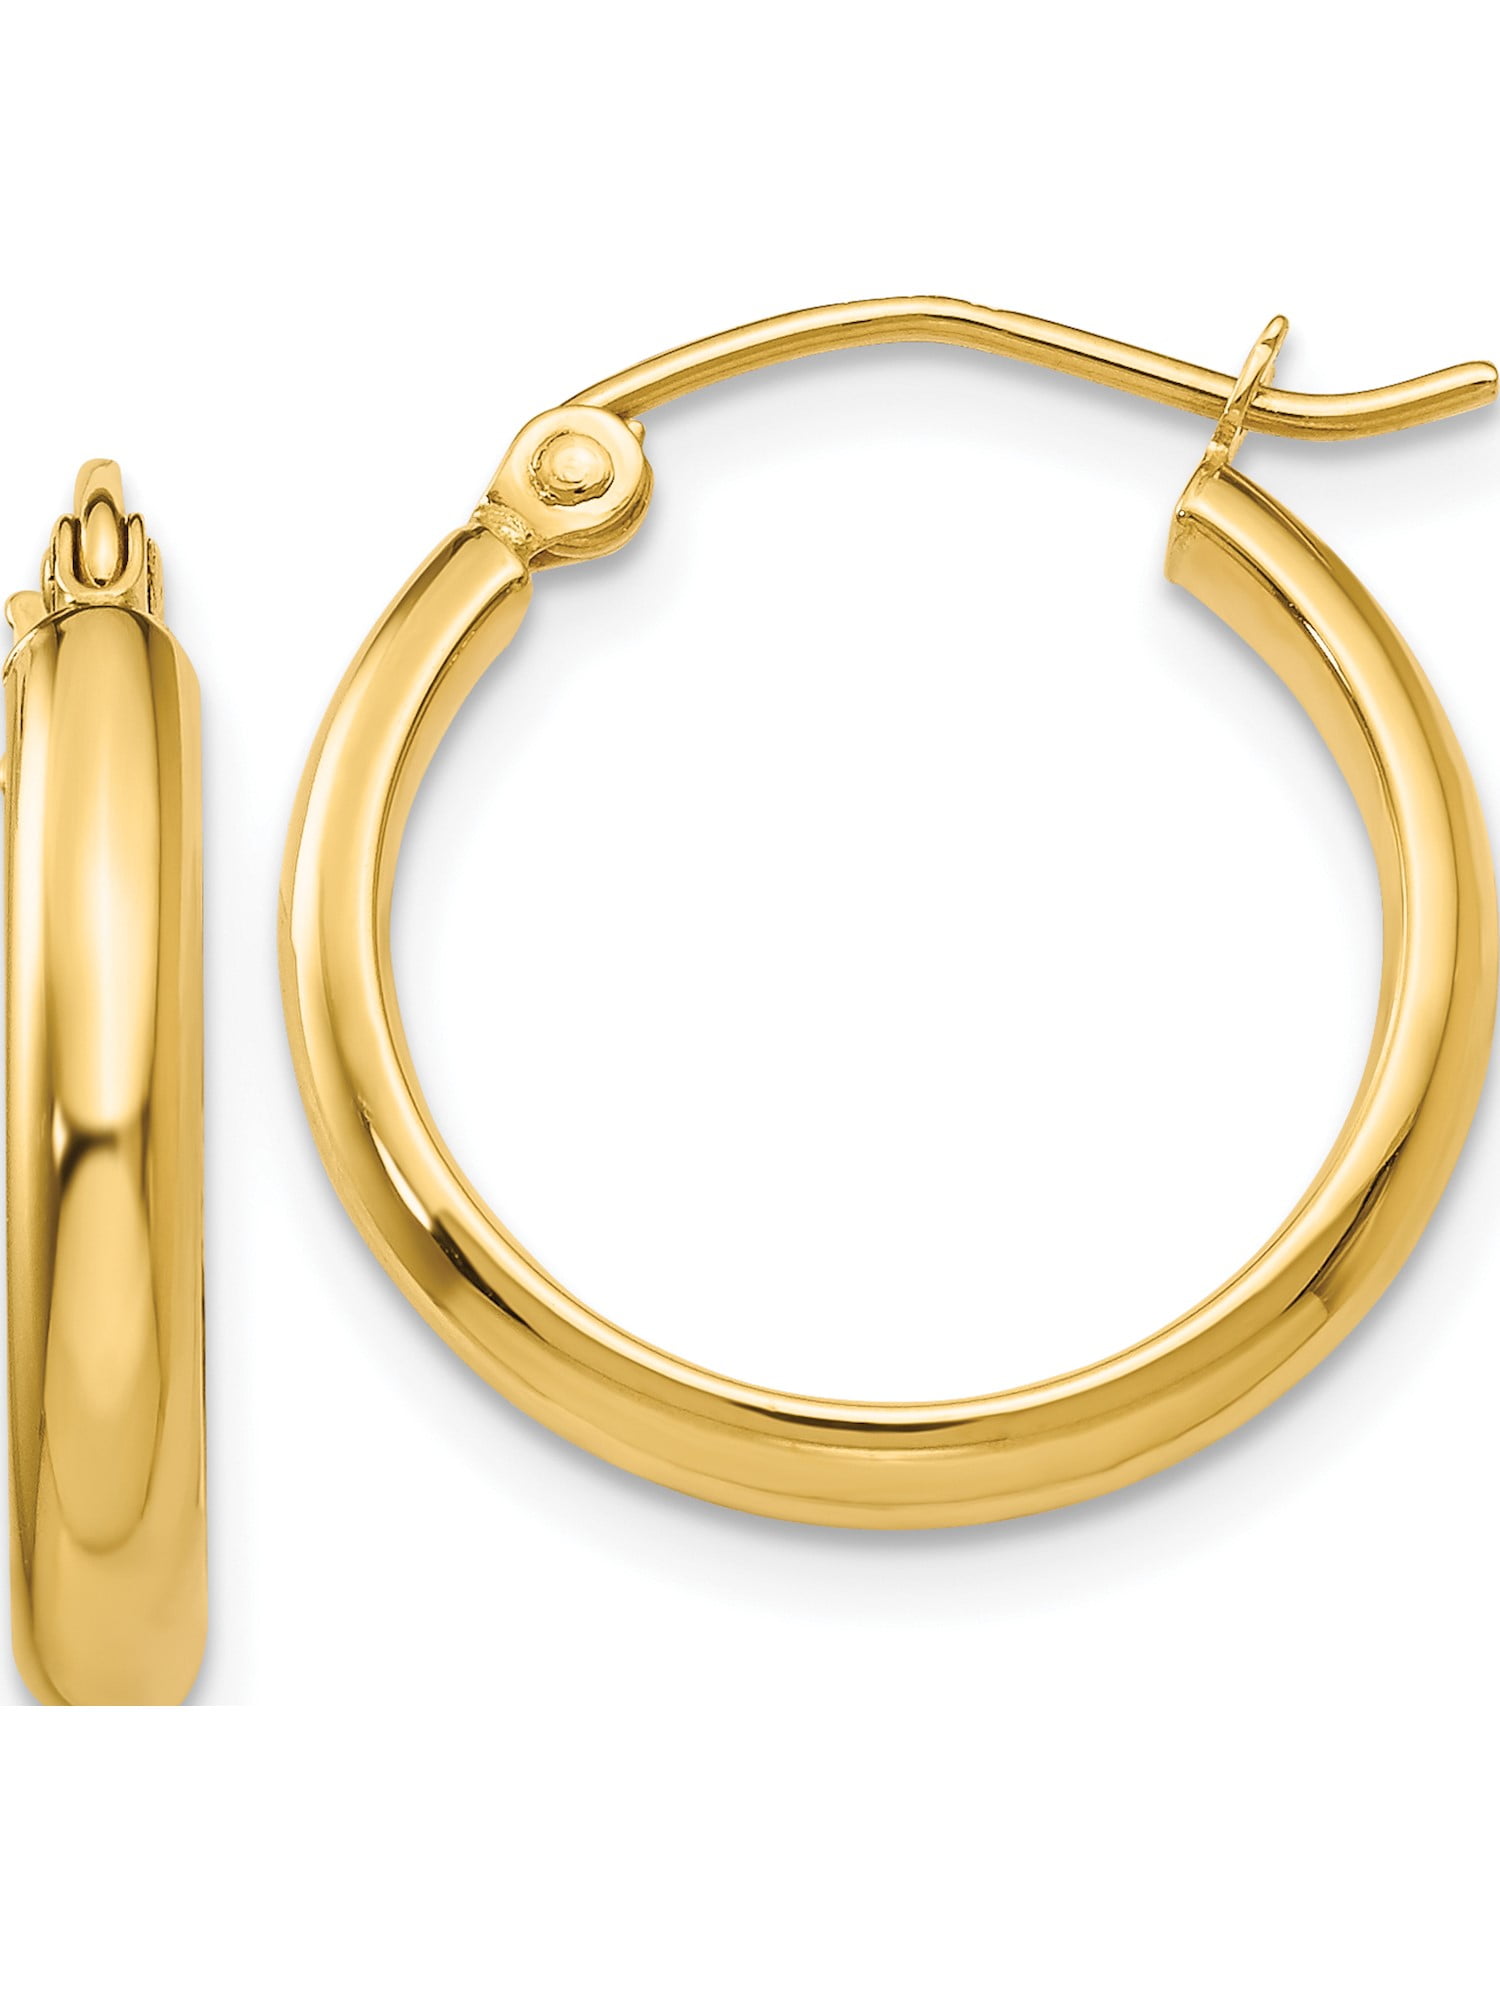 Jewelry by Sweet Pea - Designer 14K Yellow Gold Polished Hoop Earring ...